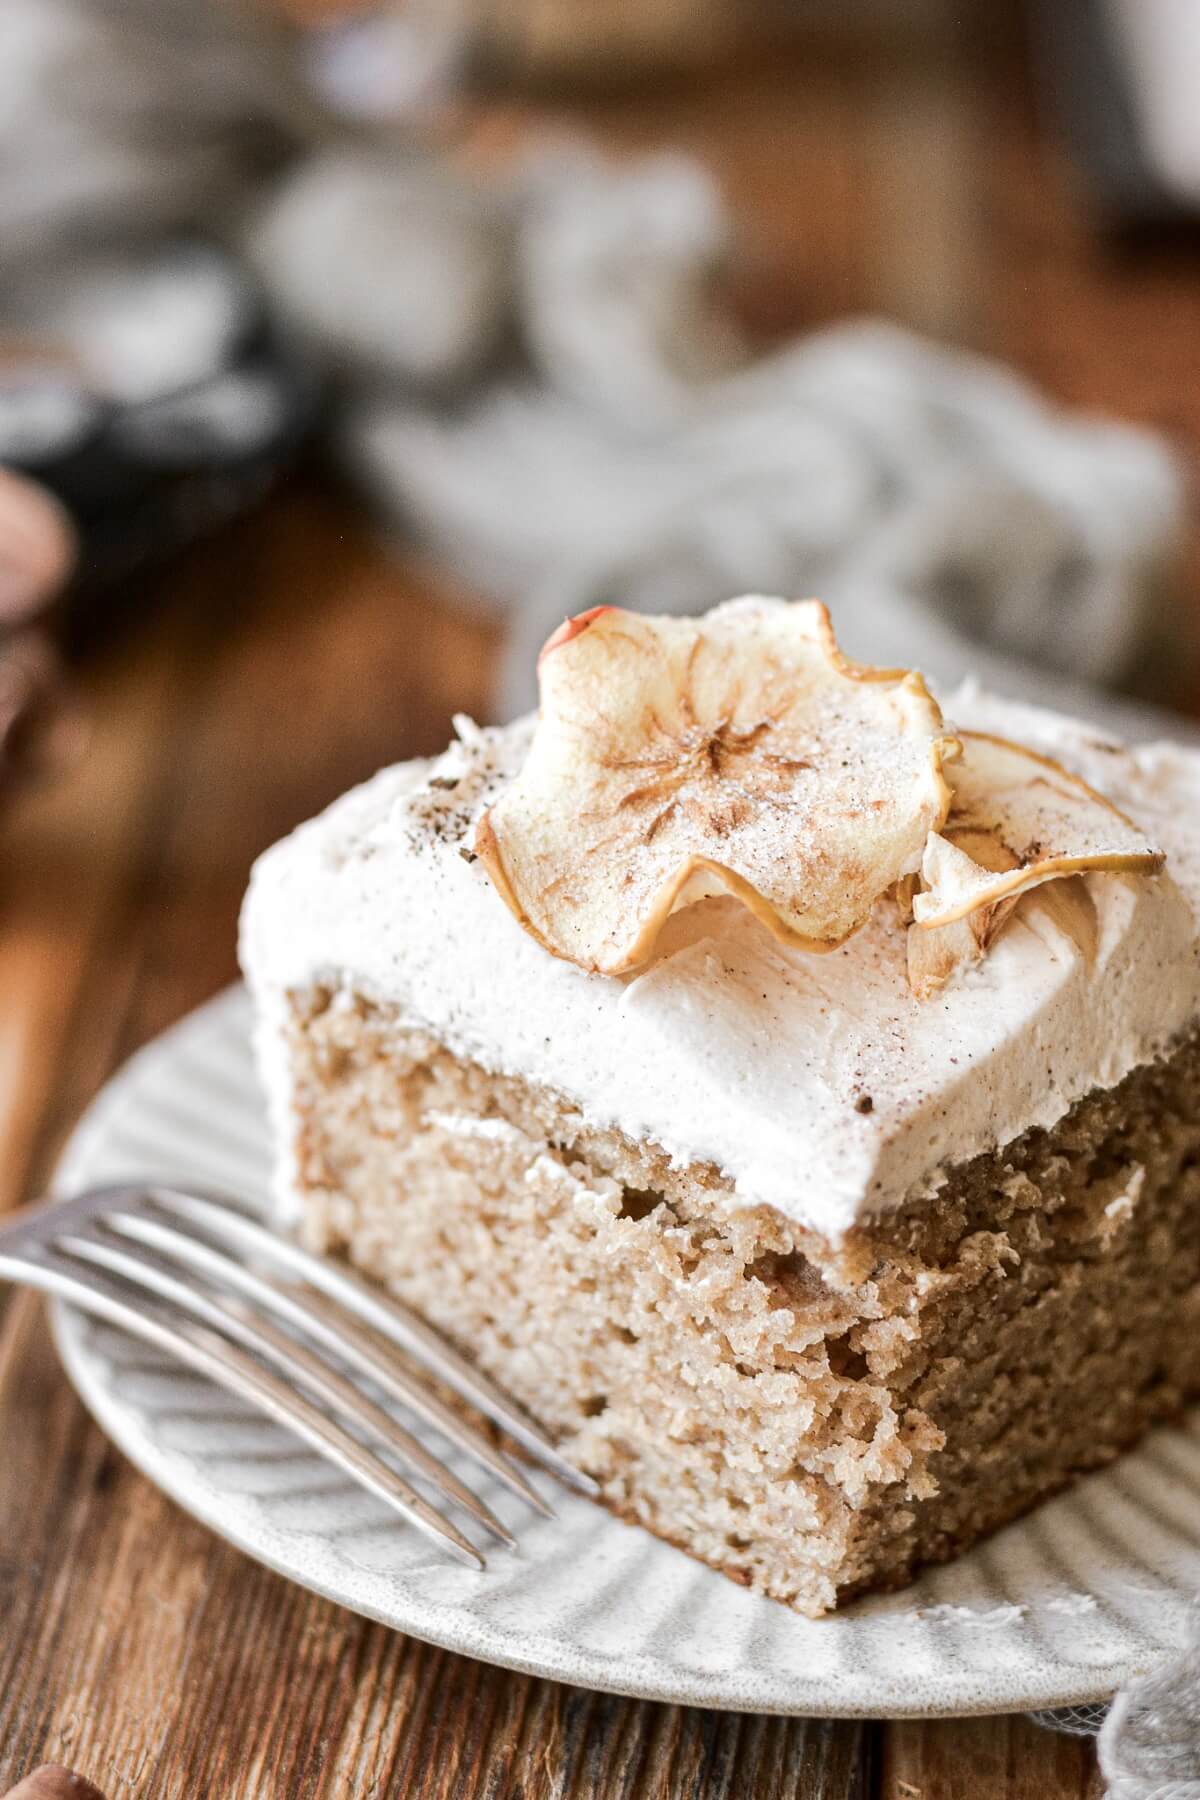 A piece of apple cider cinnamon cake with dried apple slices on top.